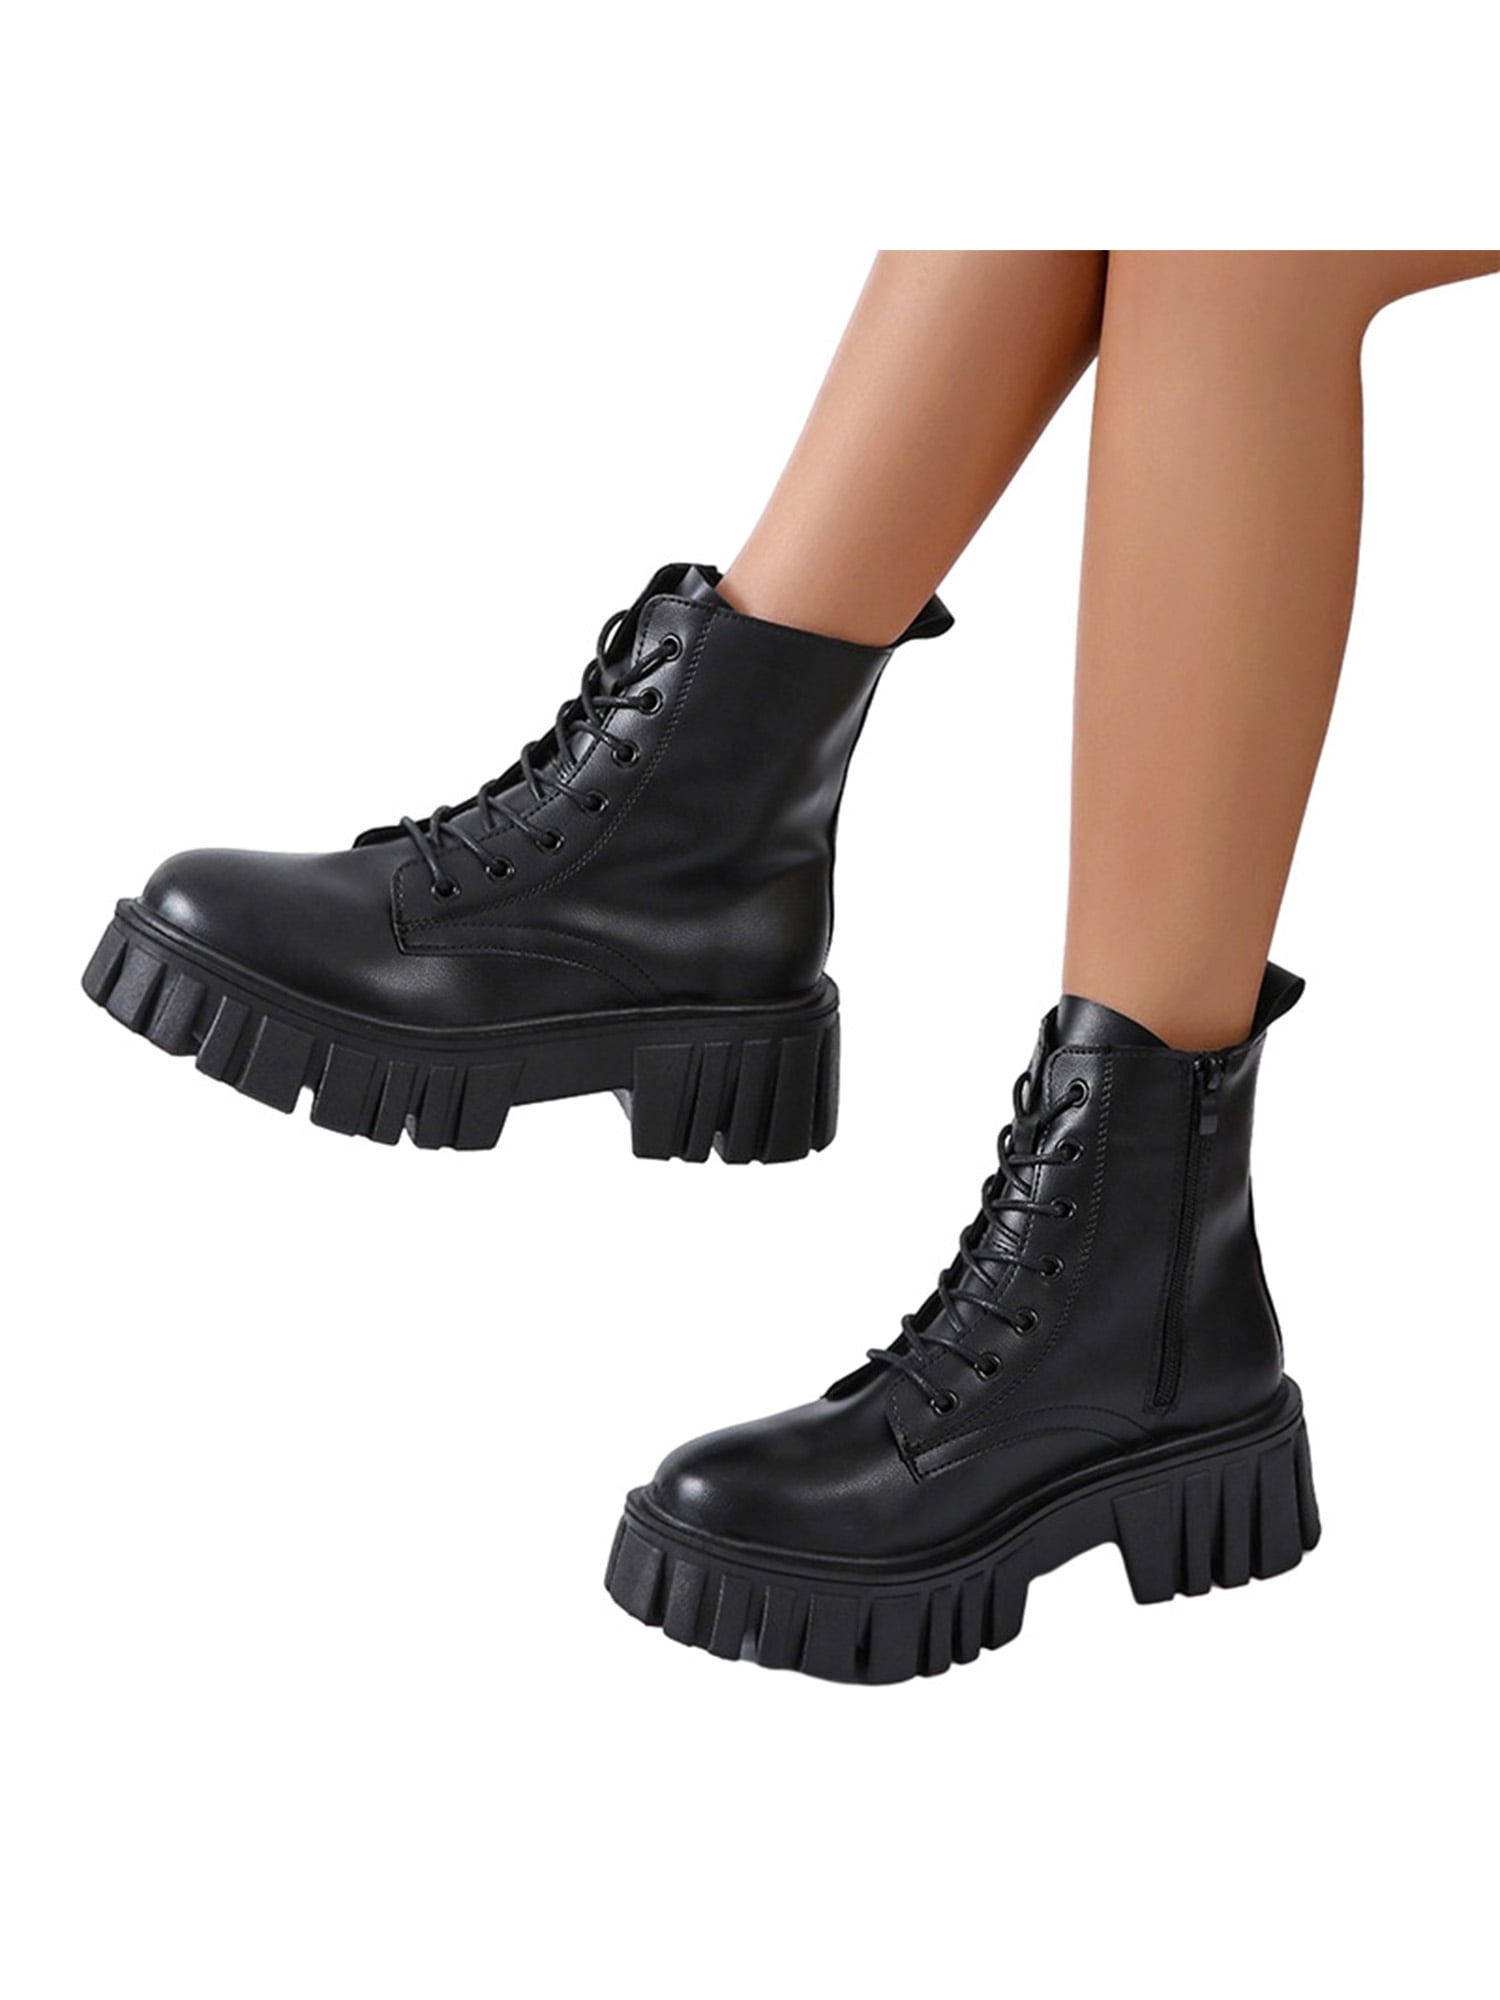 NEW FASHION PLATFORM HIGH HEELS LADIES WOMEN CASUAL ANKLE BOOTS 